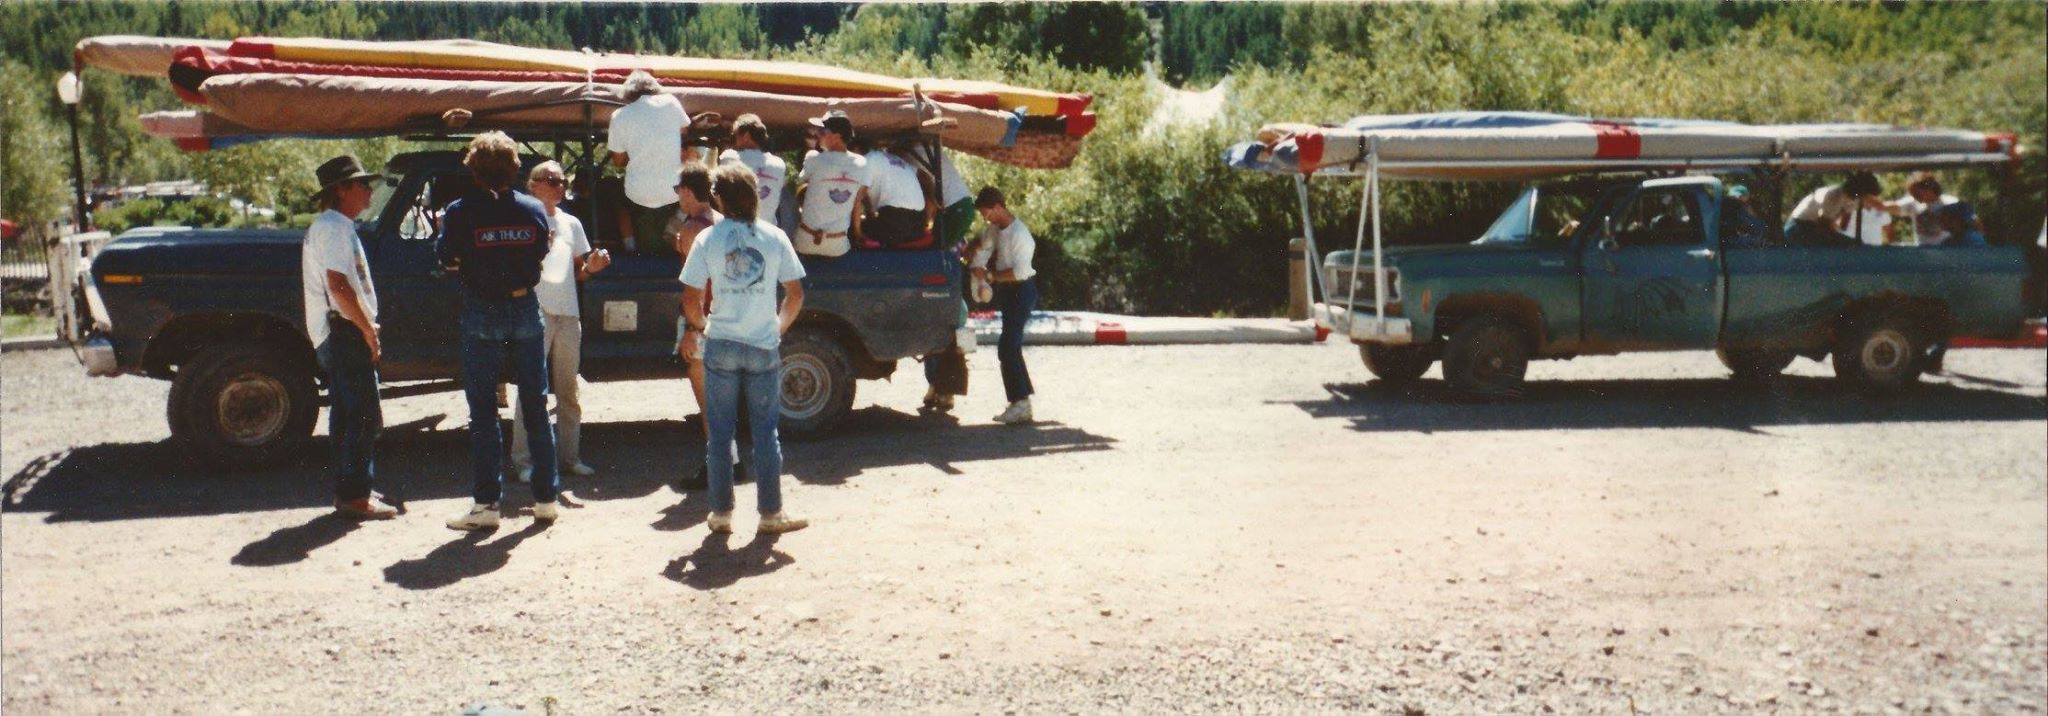 Loading up on Bumbo's F250 lets go flying 1989.